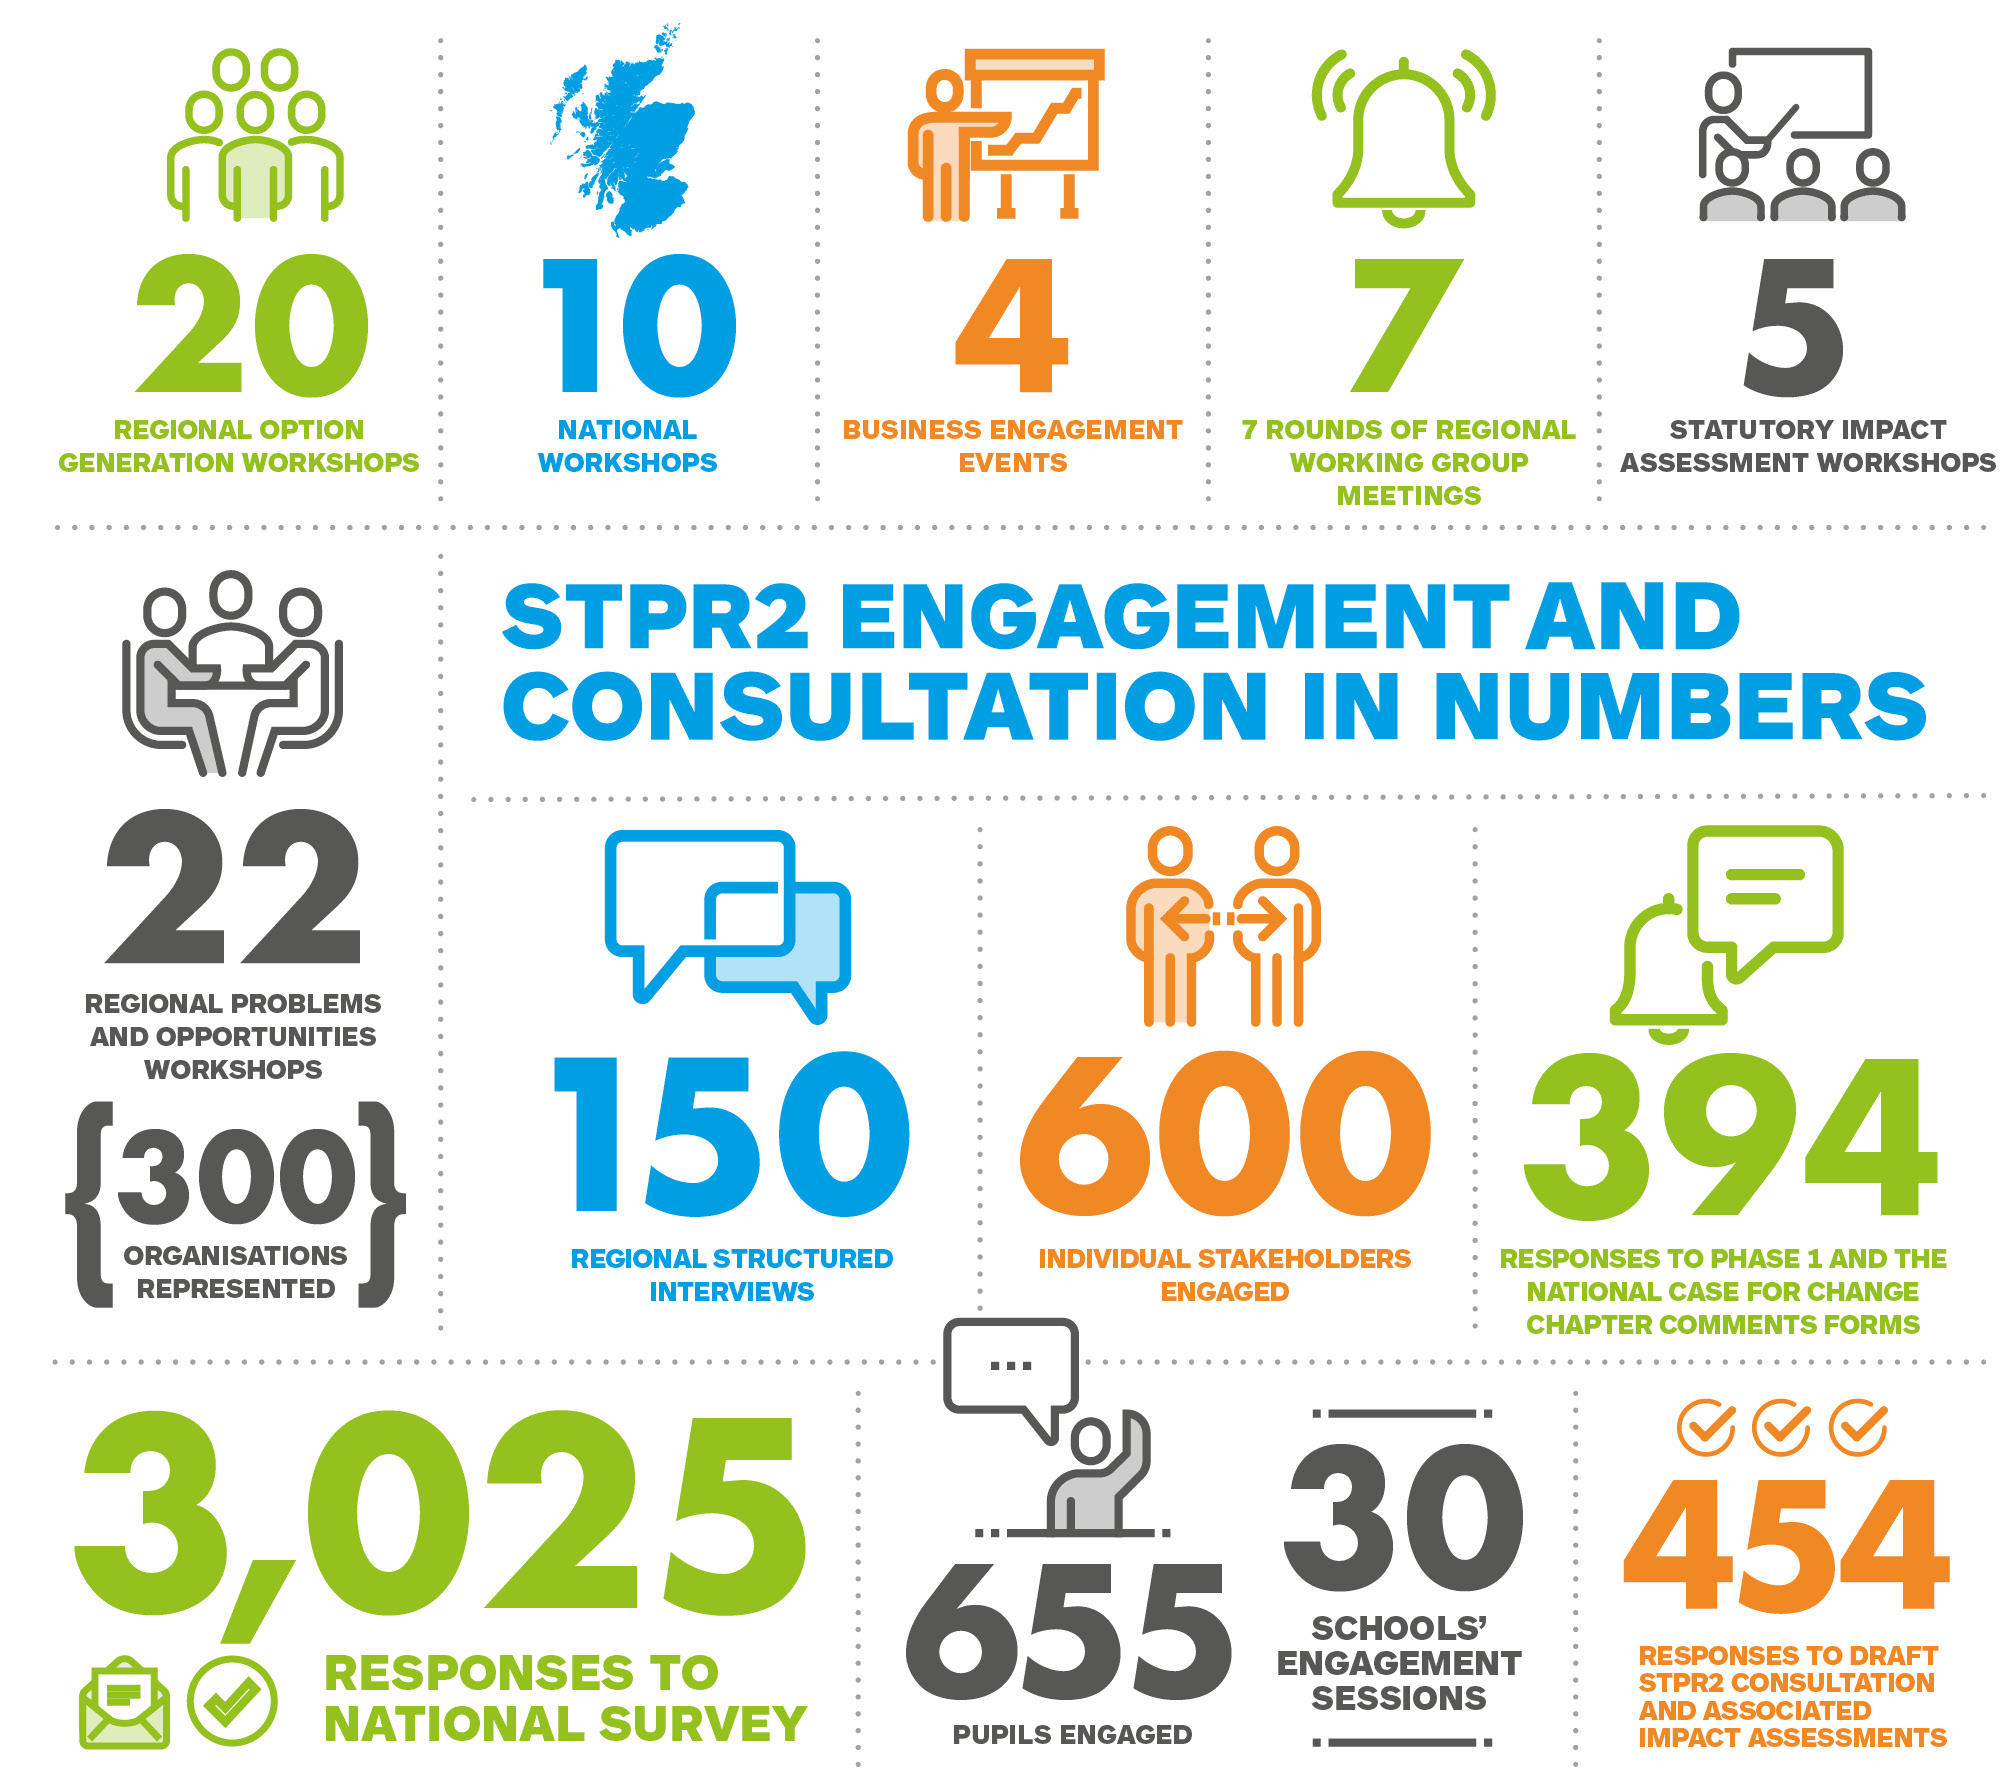 Infographic showing engagement and consultation undertaken for STPR2 - as described in text below